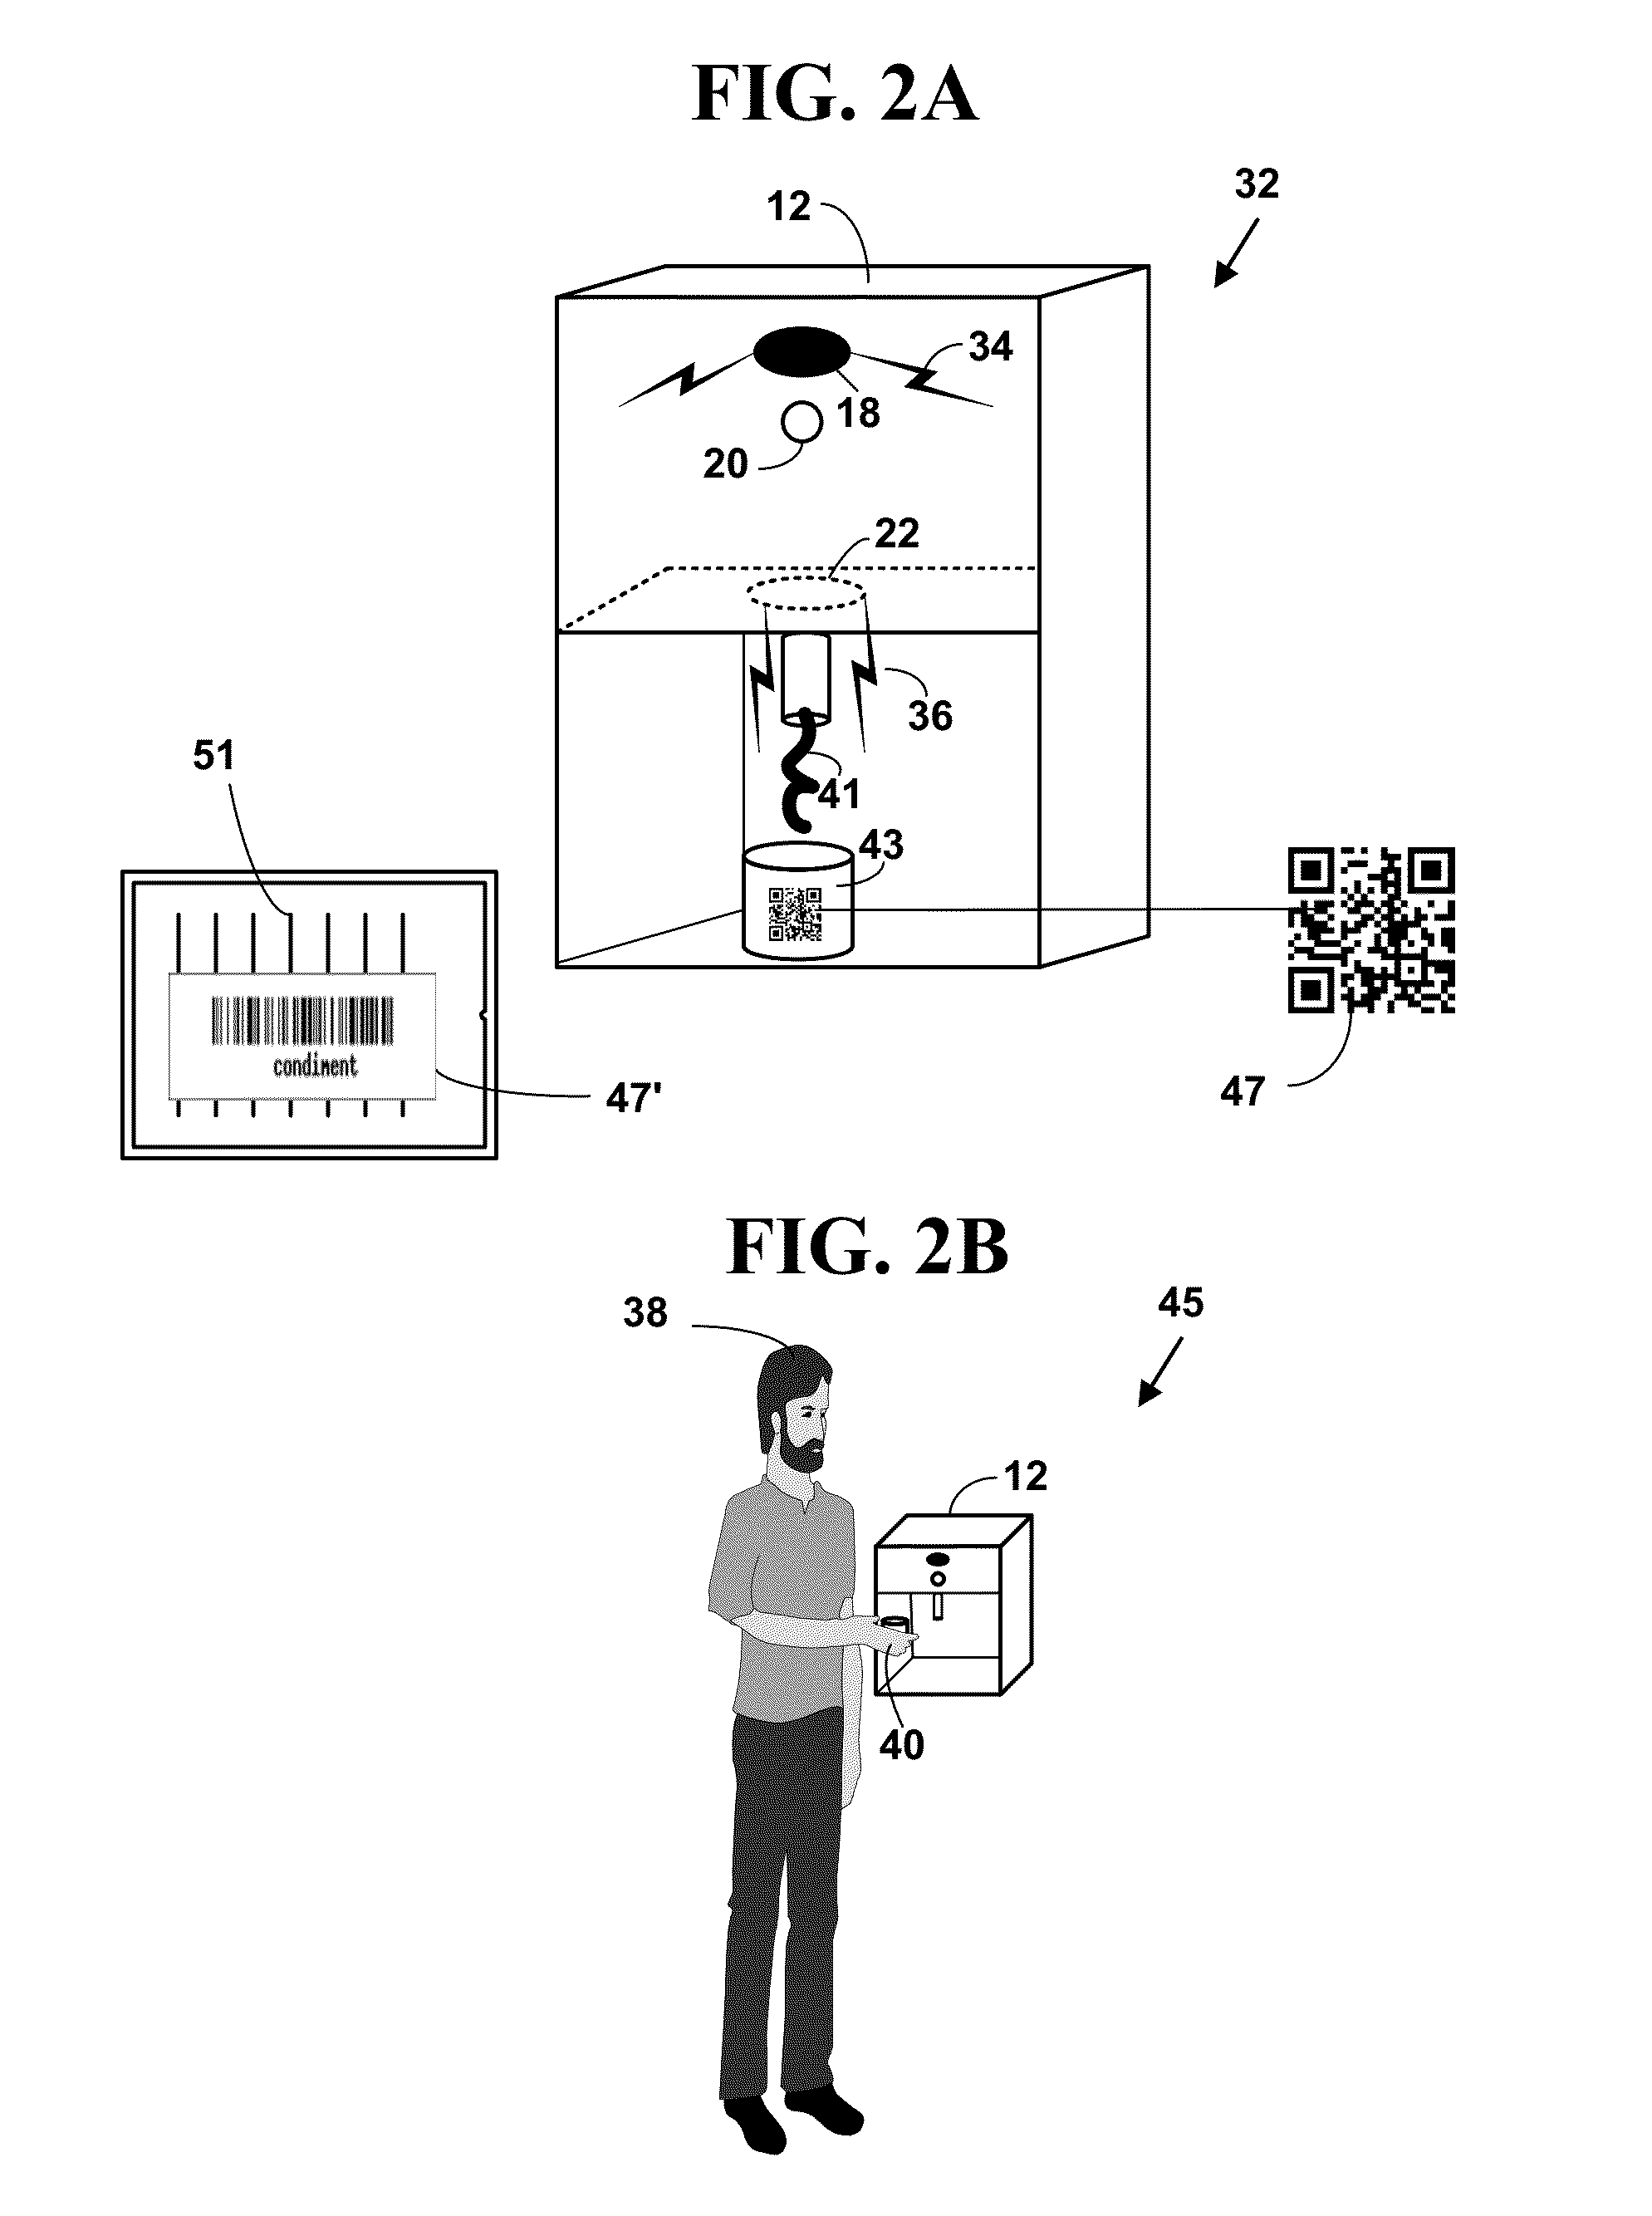 Sanitary touch-free automatic condiment dispensing apparatus and method of use